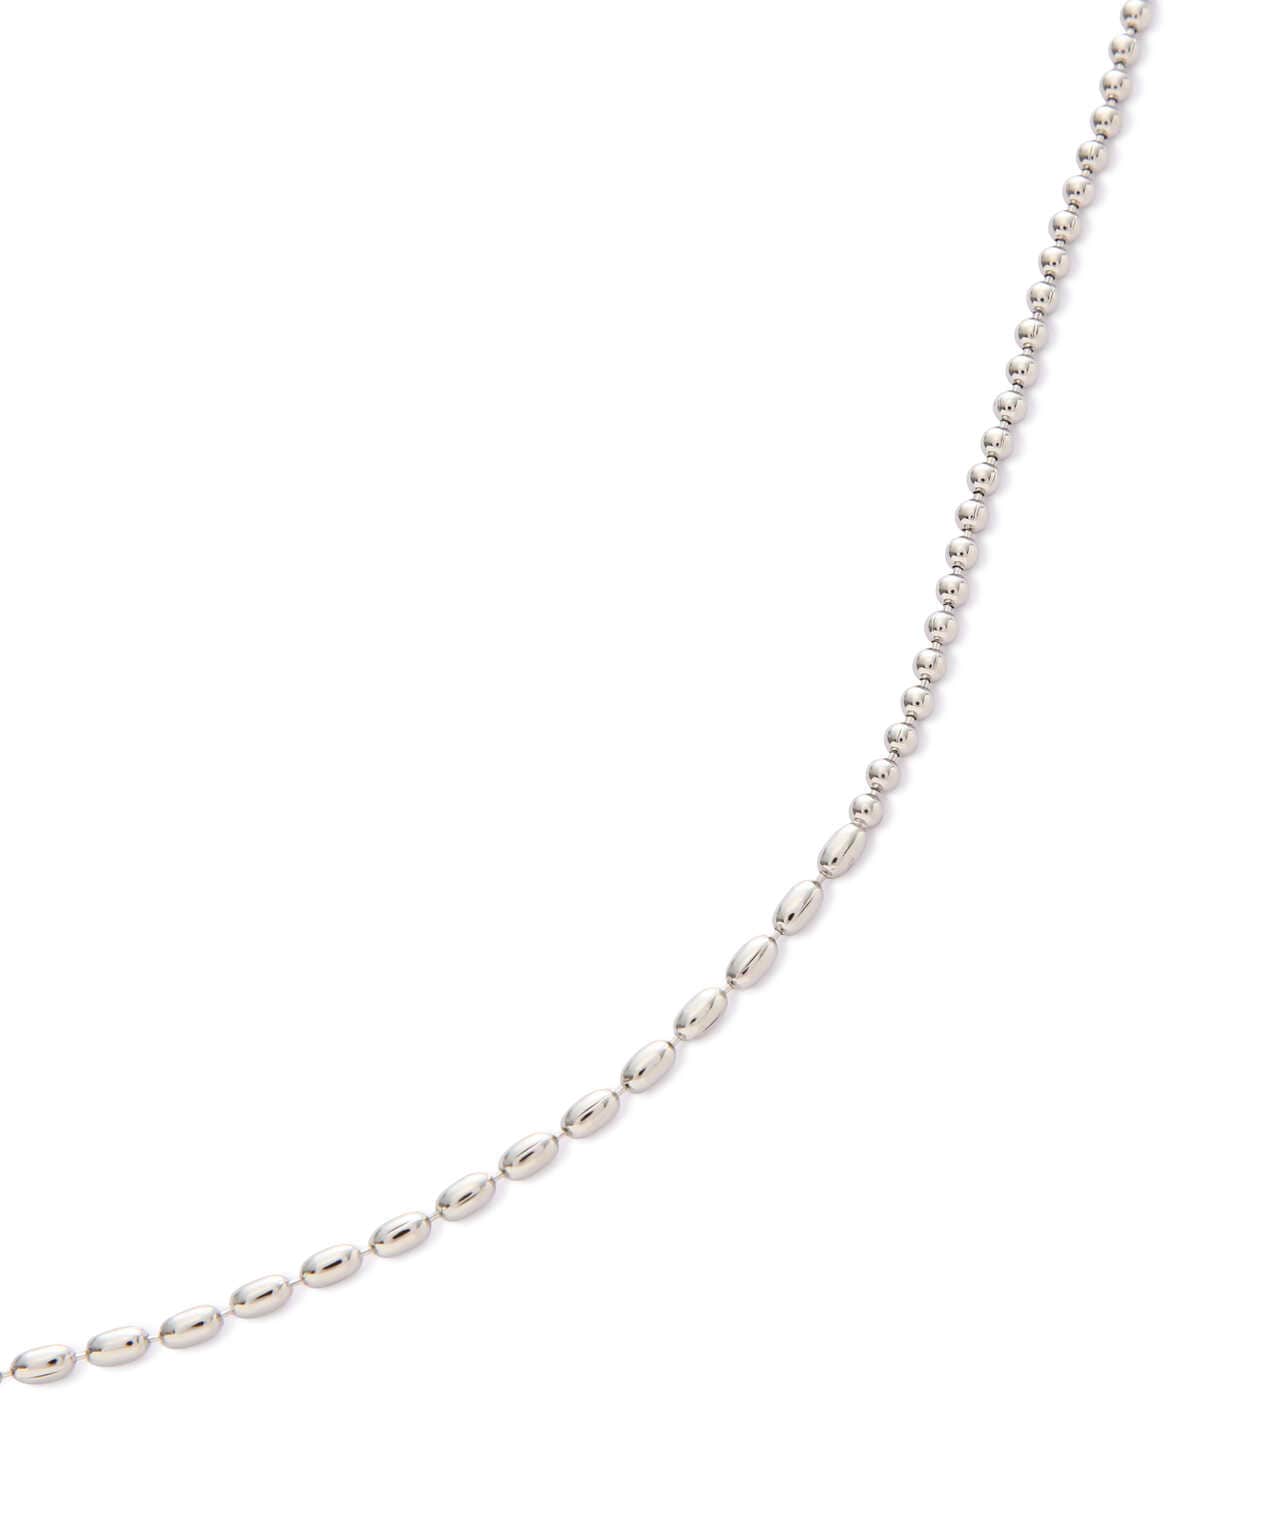 DROIT BELLO(ドロイトベロ) PEARL CHAIN NECKLACE/パールチェーンネックレス